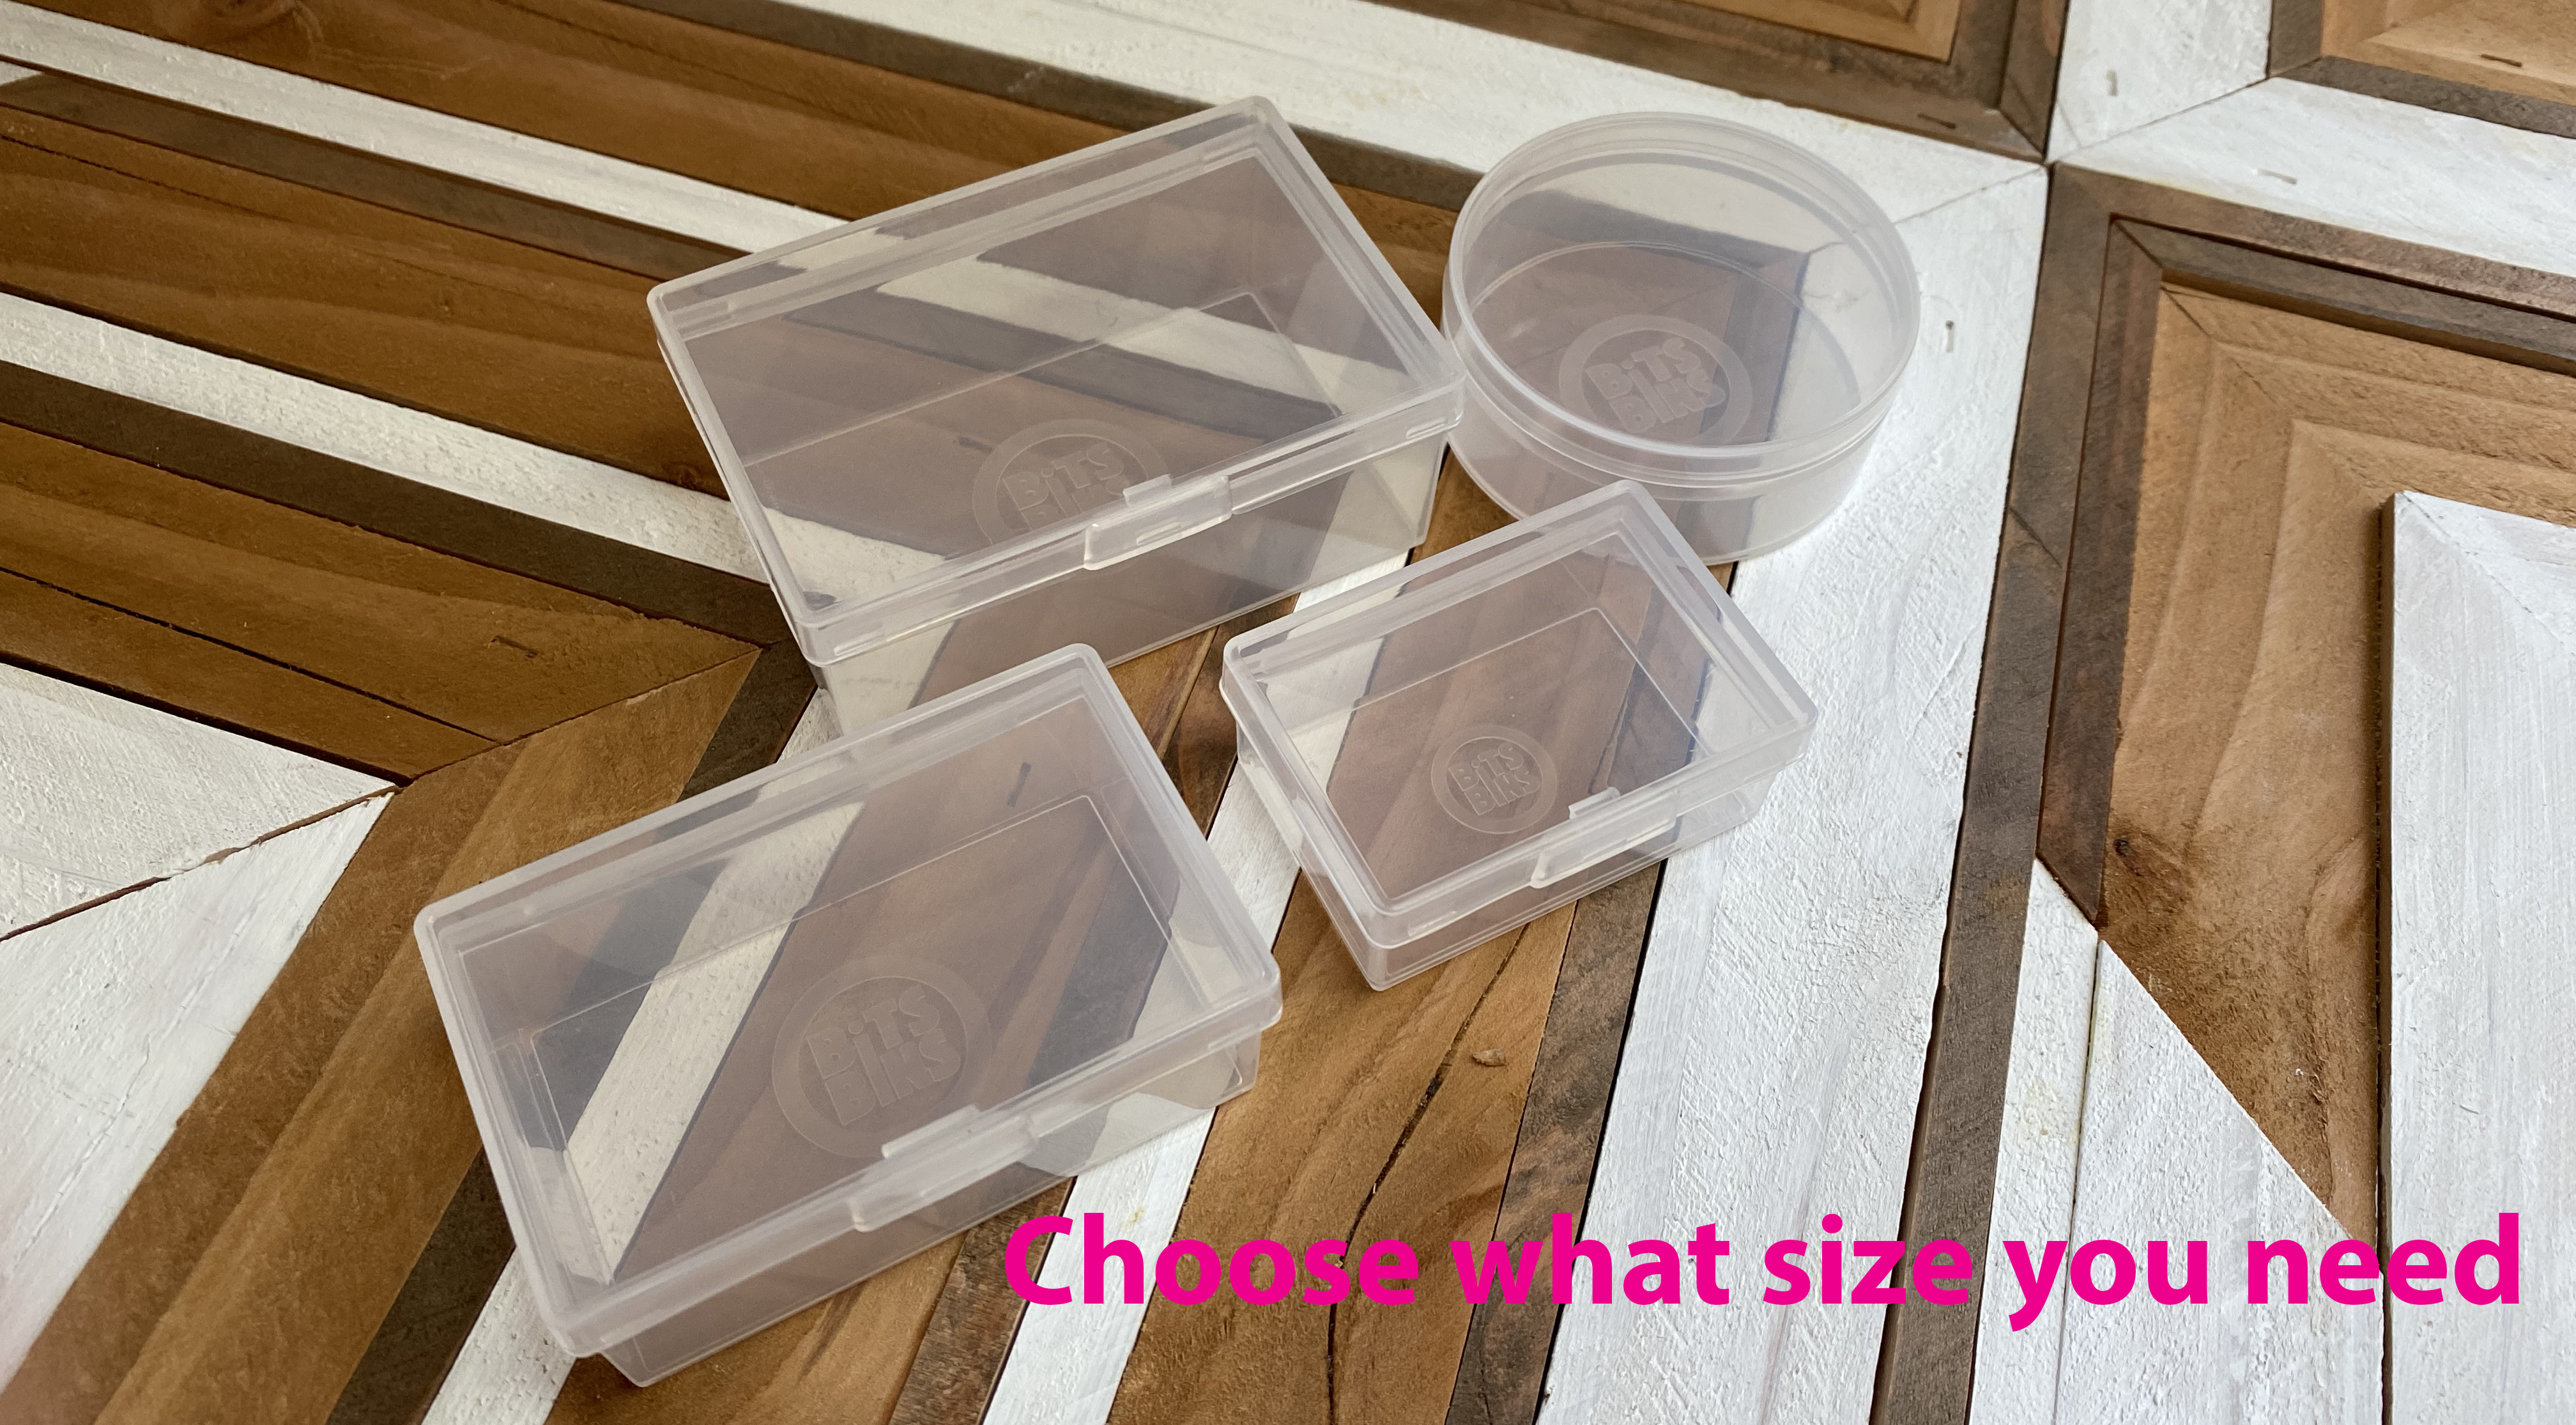 12 BitsBins XL  Containers Measure 3.5 X 2.4 X 1.4